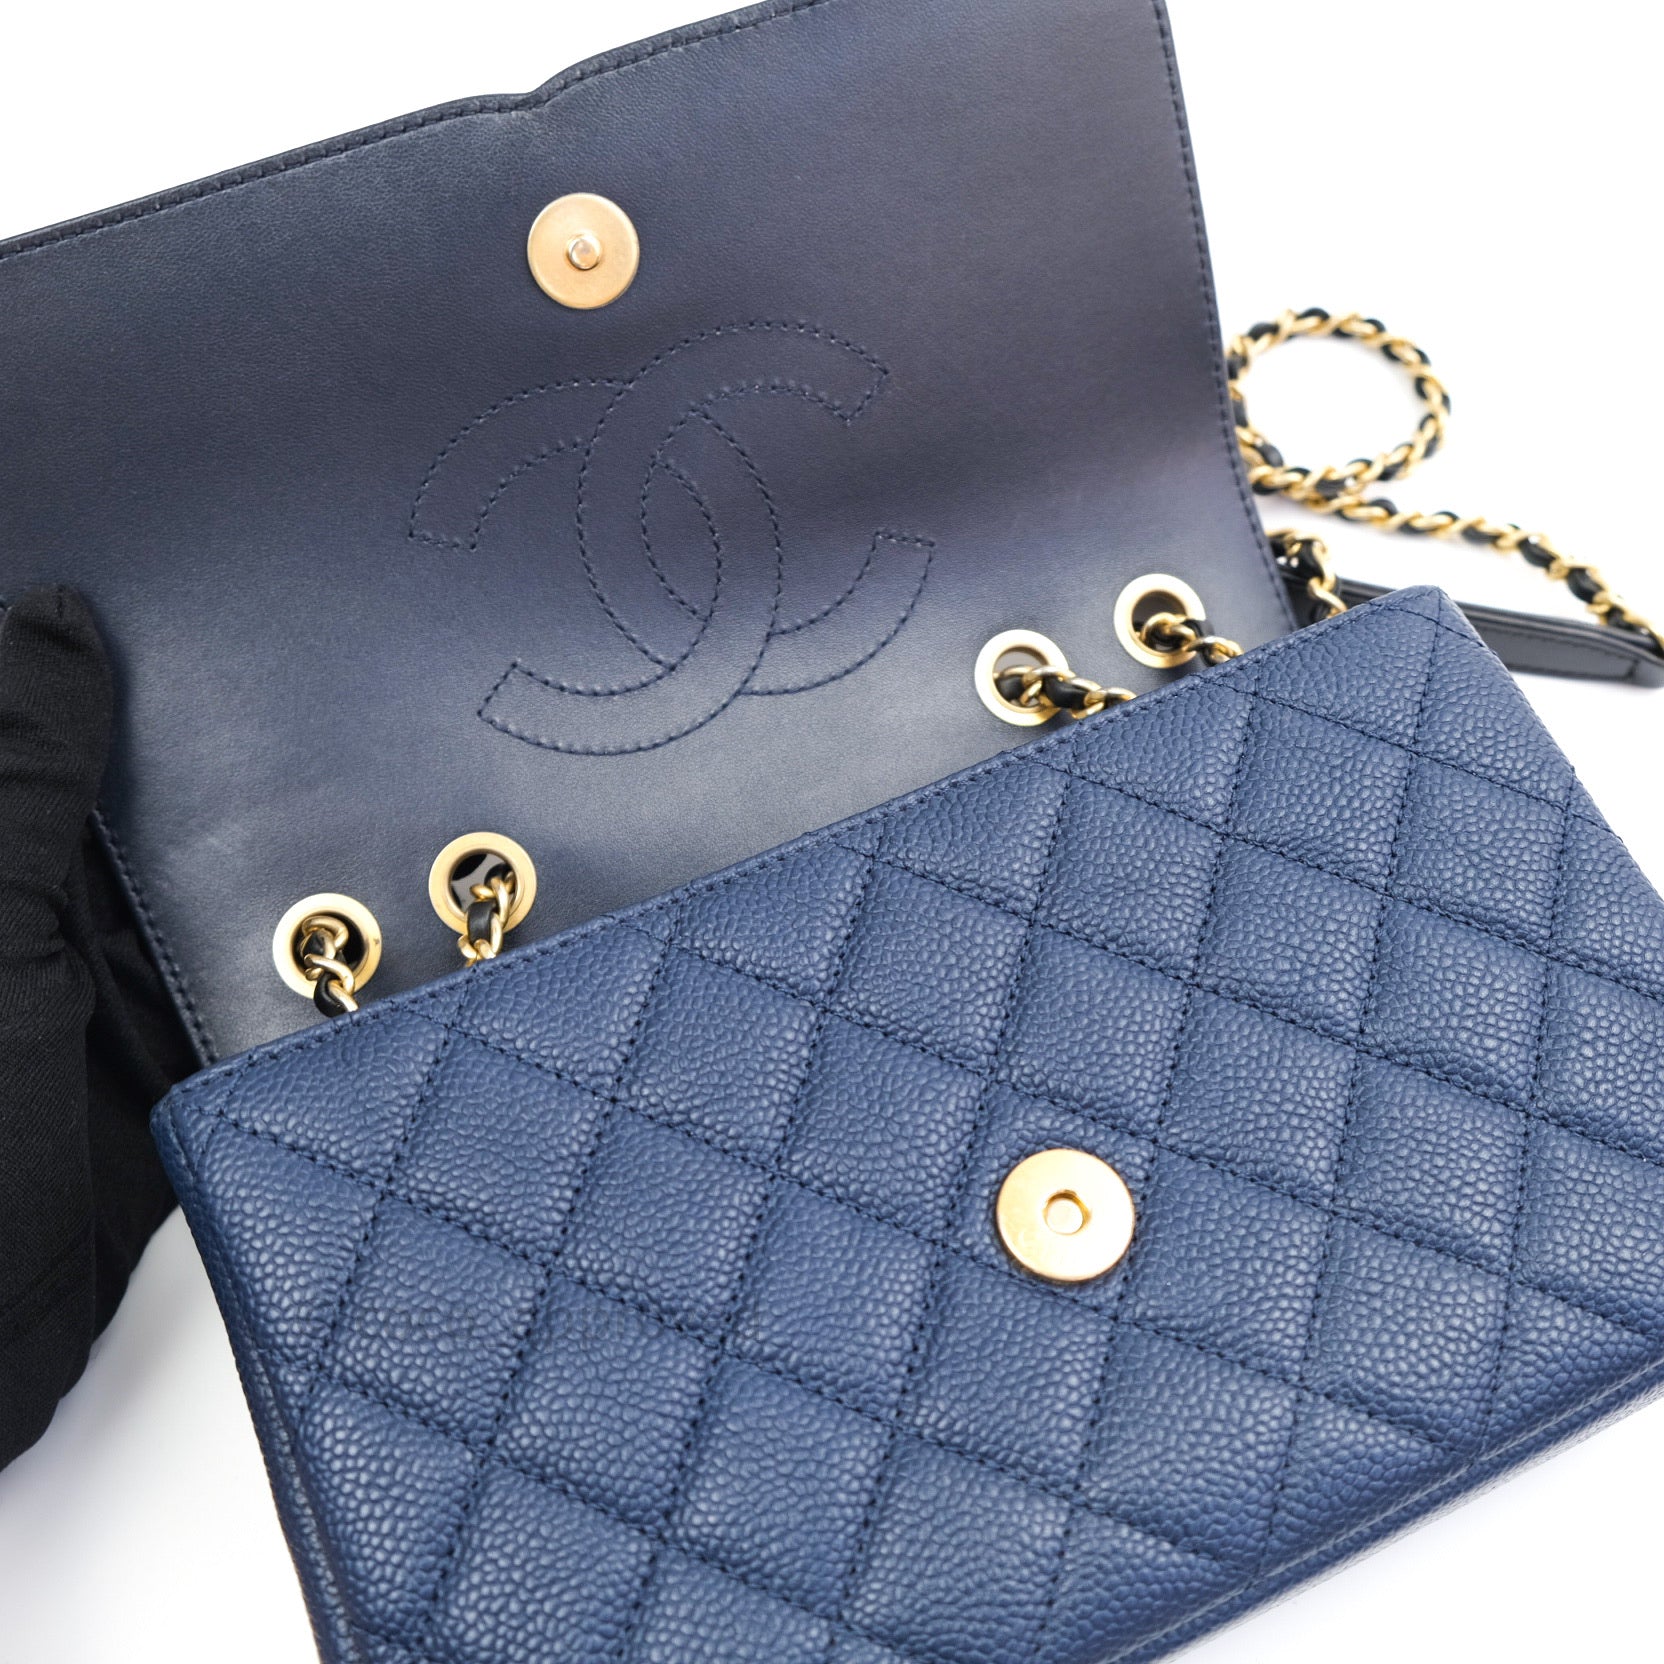 CHANEL Caviar Quilted Small CC Filigree Flap Navy 1269915